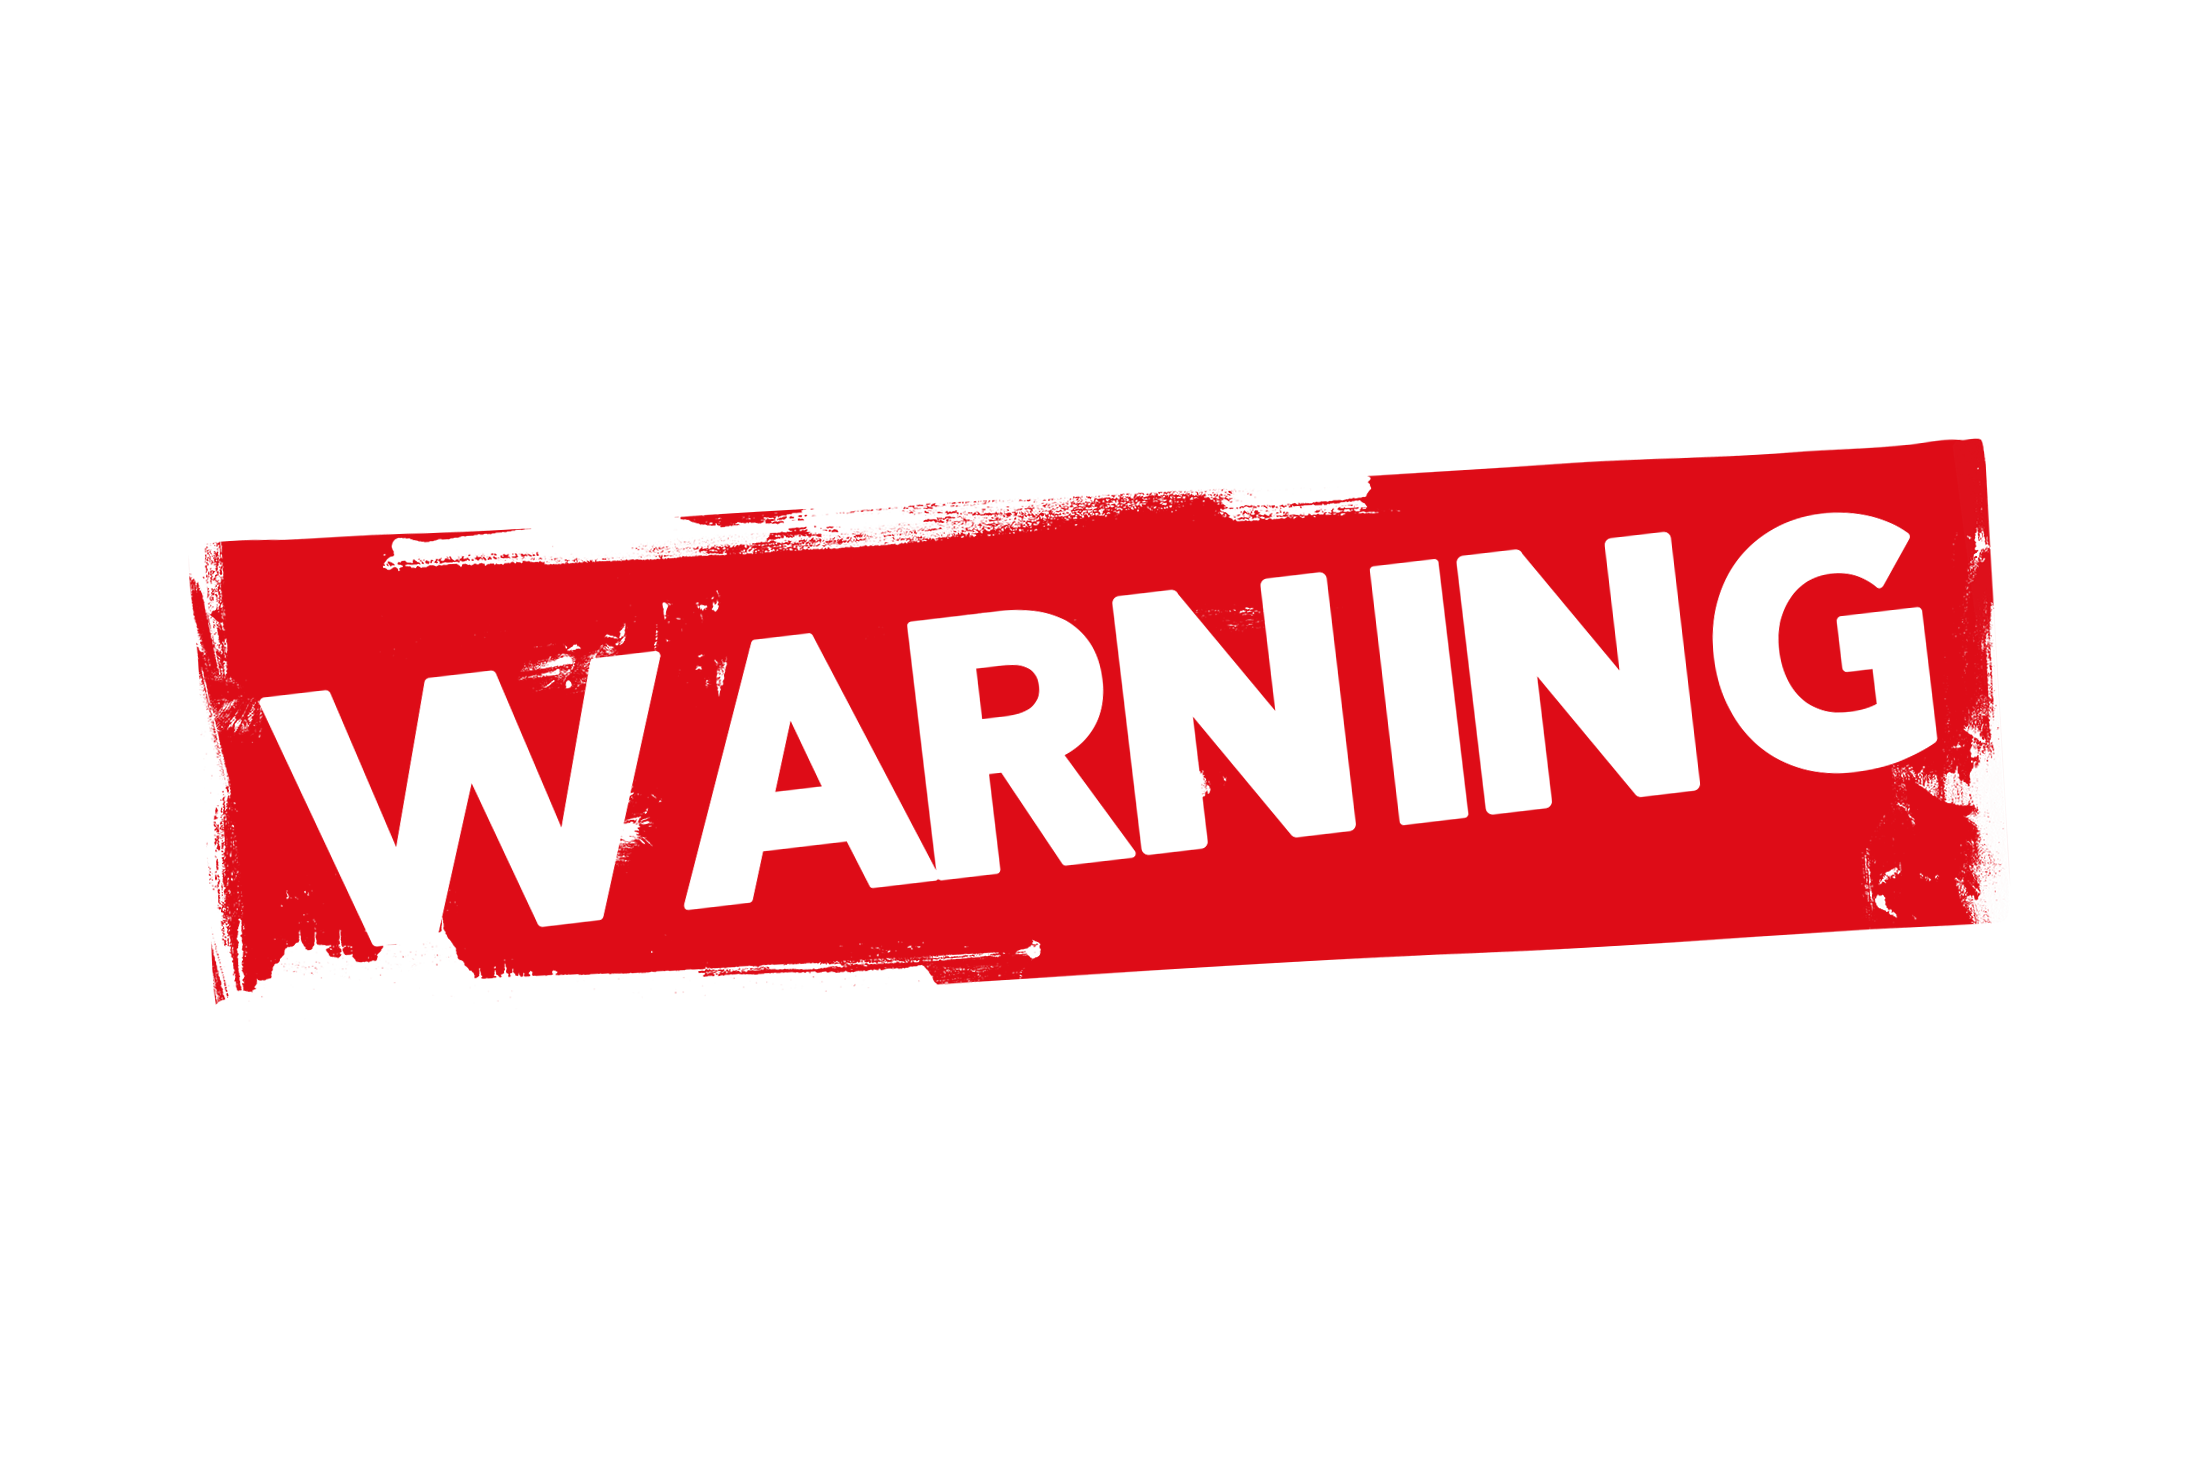 Grunge warning label PNG and PSD